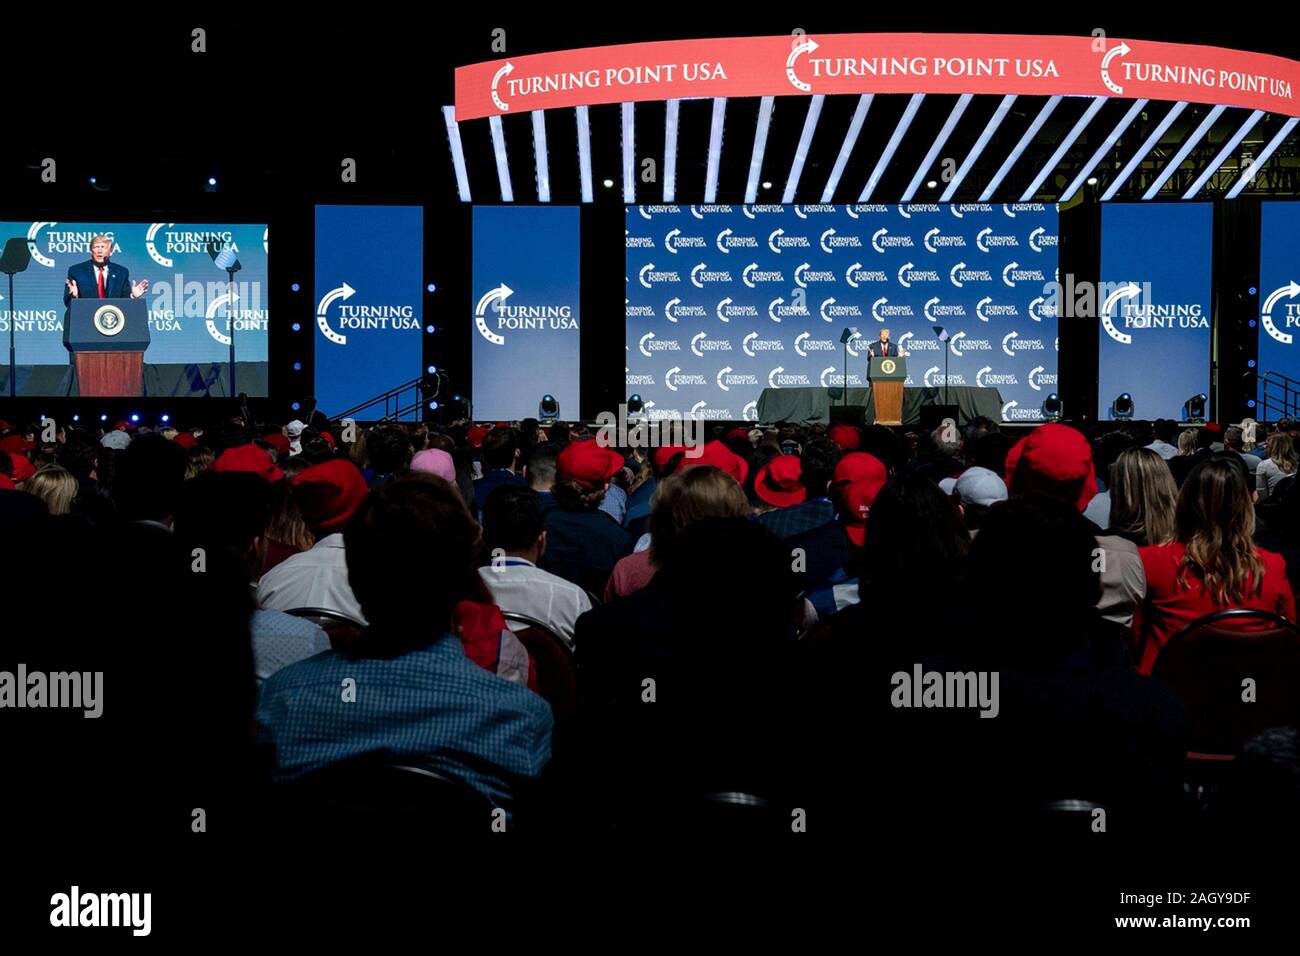 U.S President Donald Trump delivers remarks at the Turning Point USA 5th annual Student Action Summit at the Palm Beach County Convention Center December 21, 2019 in West Palm Beach, Florida. Trump rallied the youth conservative group with wild claims on wind turbines and attacks on his opponents. Stock Photo